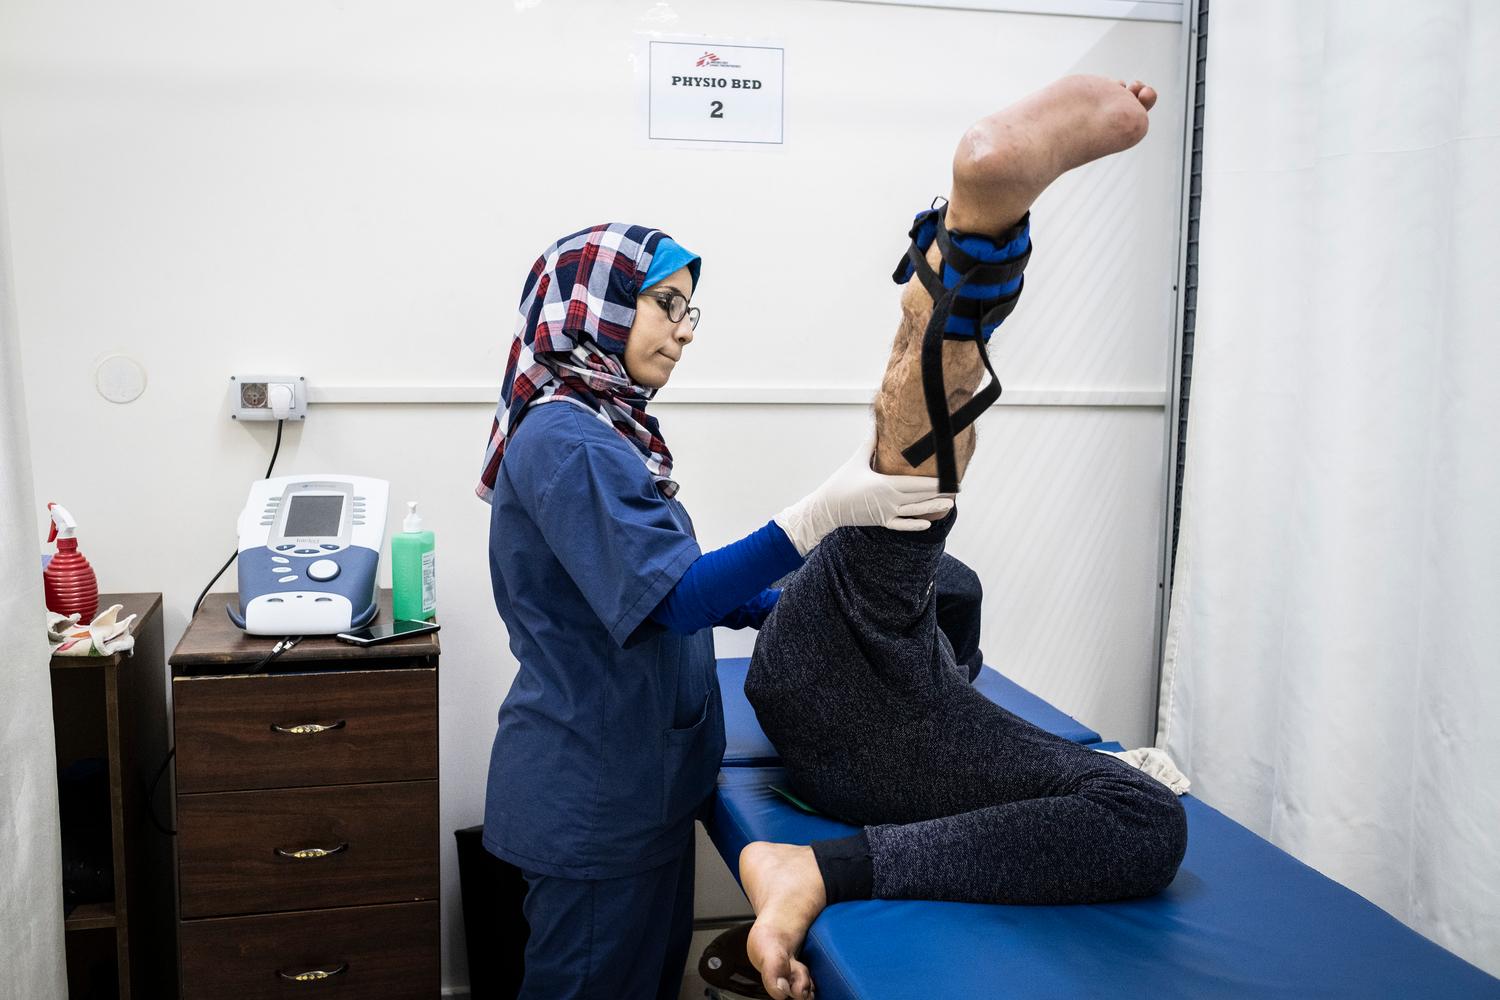 A physiotherapist working with MSF at Al Awda hospital in northern Gaza, assists a patient with his exercises. Palestine, November 2019. 